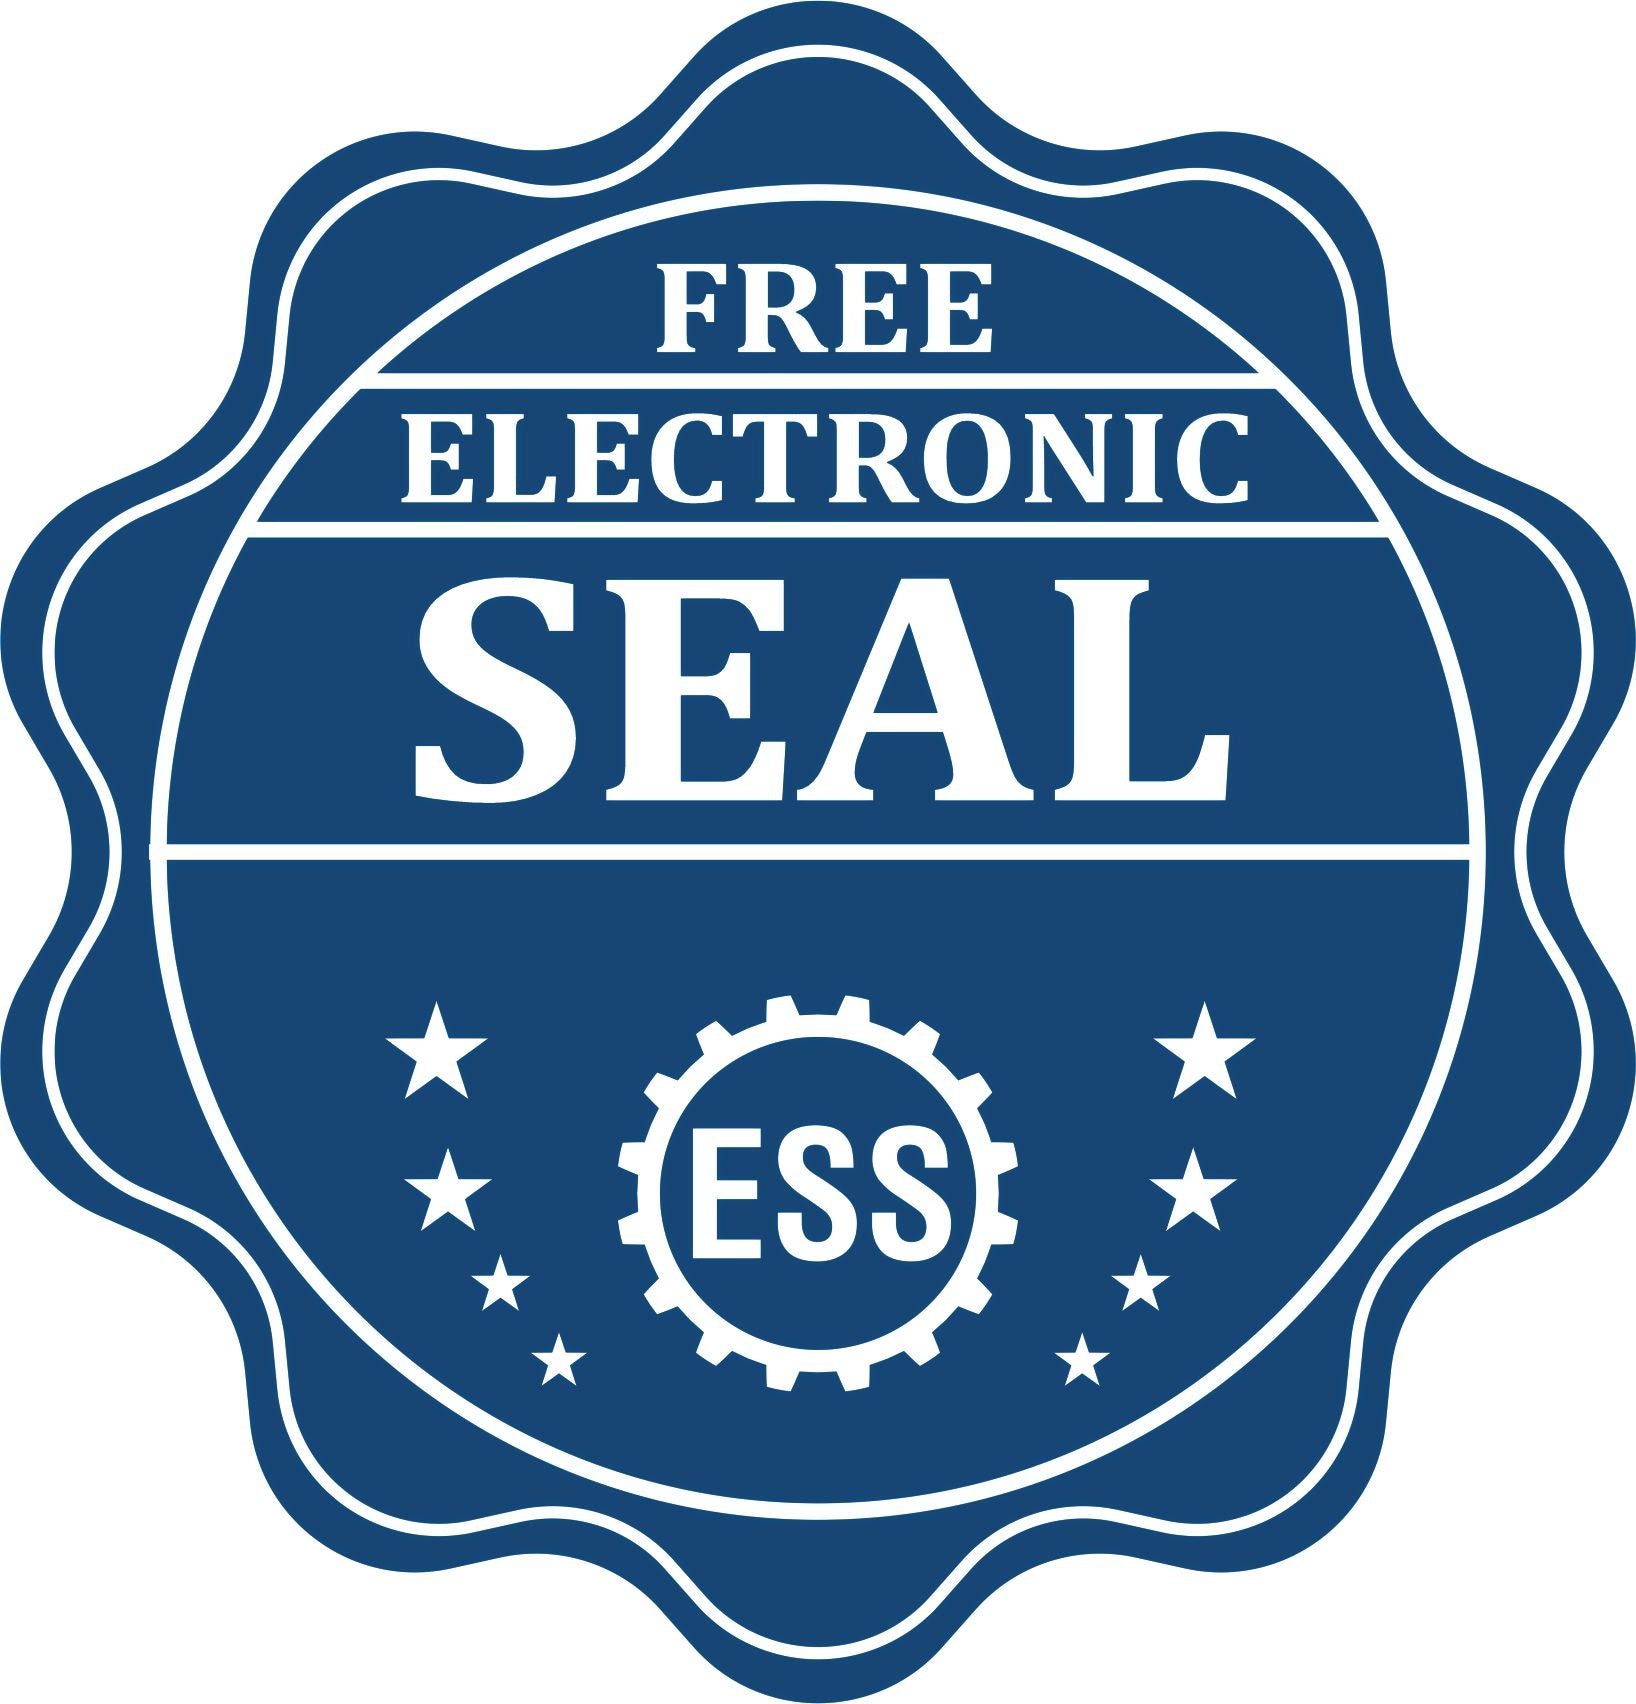 A badge showing a free electronic seal for the Handheld Florida Professional Engineer Embosser with stars and the ESS gear on the emblem.